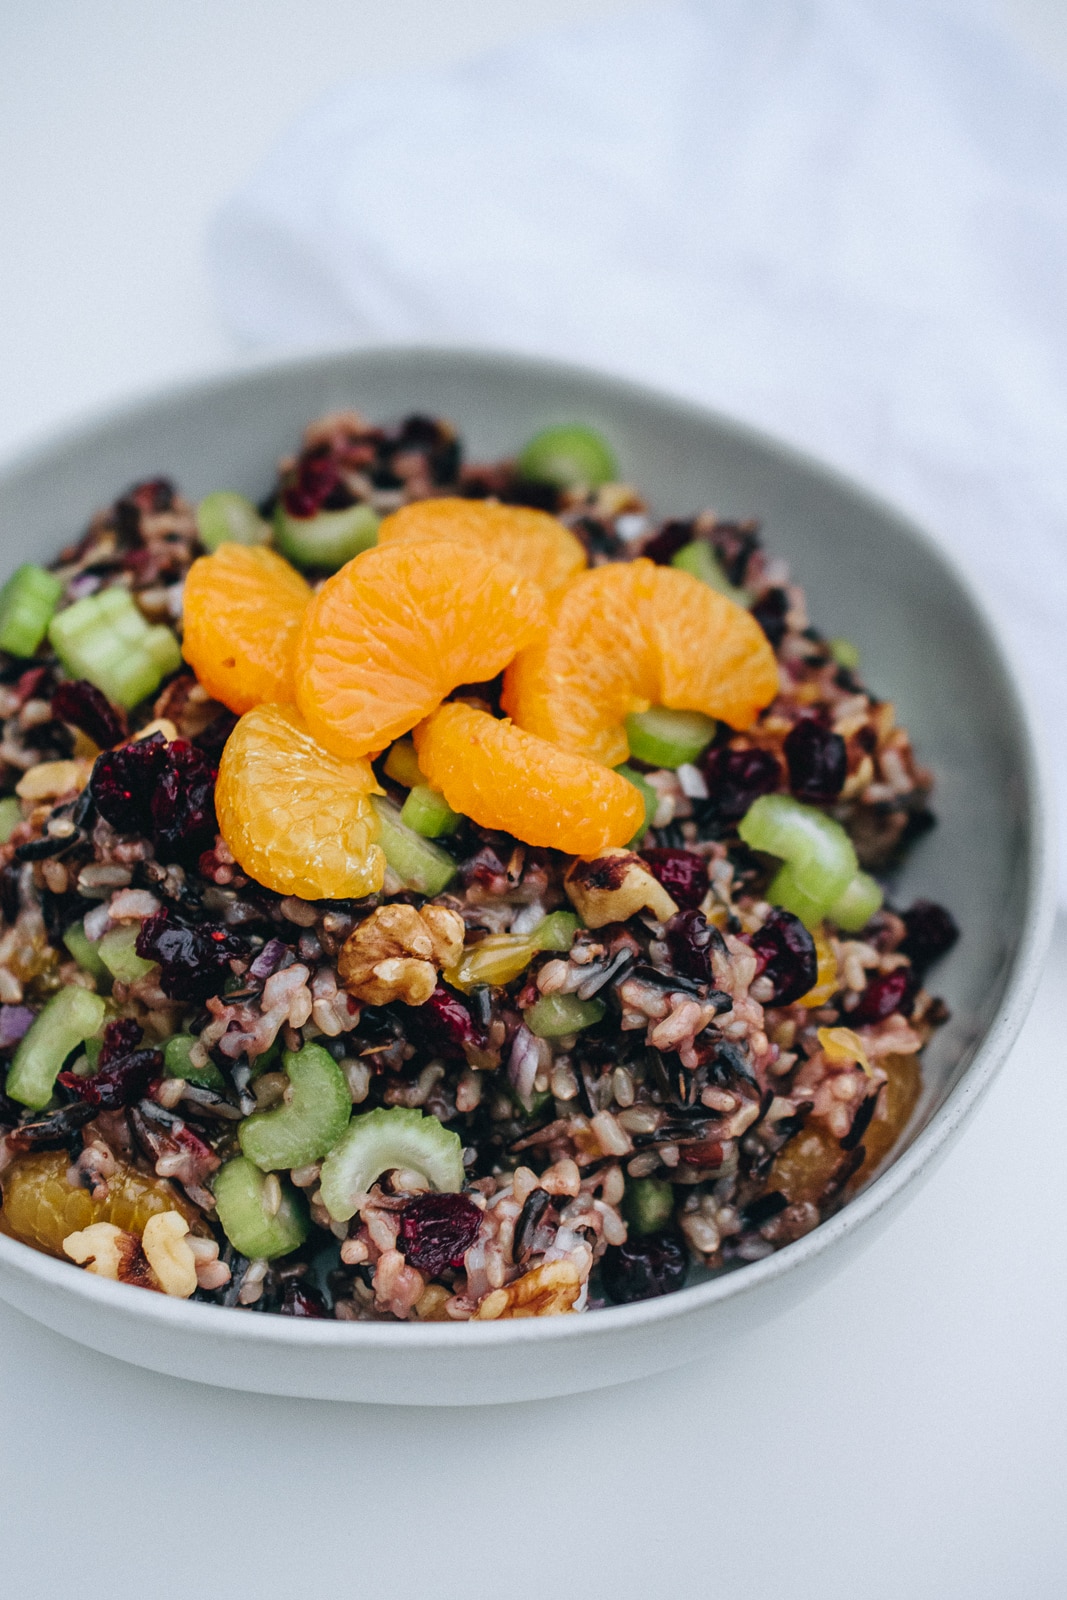 45 degree view of wild rice salad in a white bowl